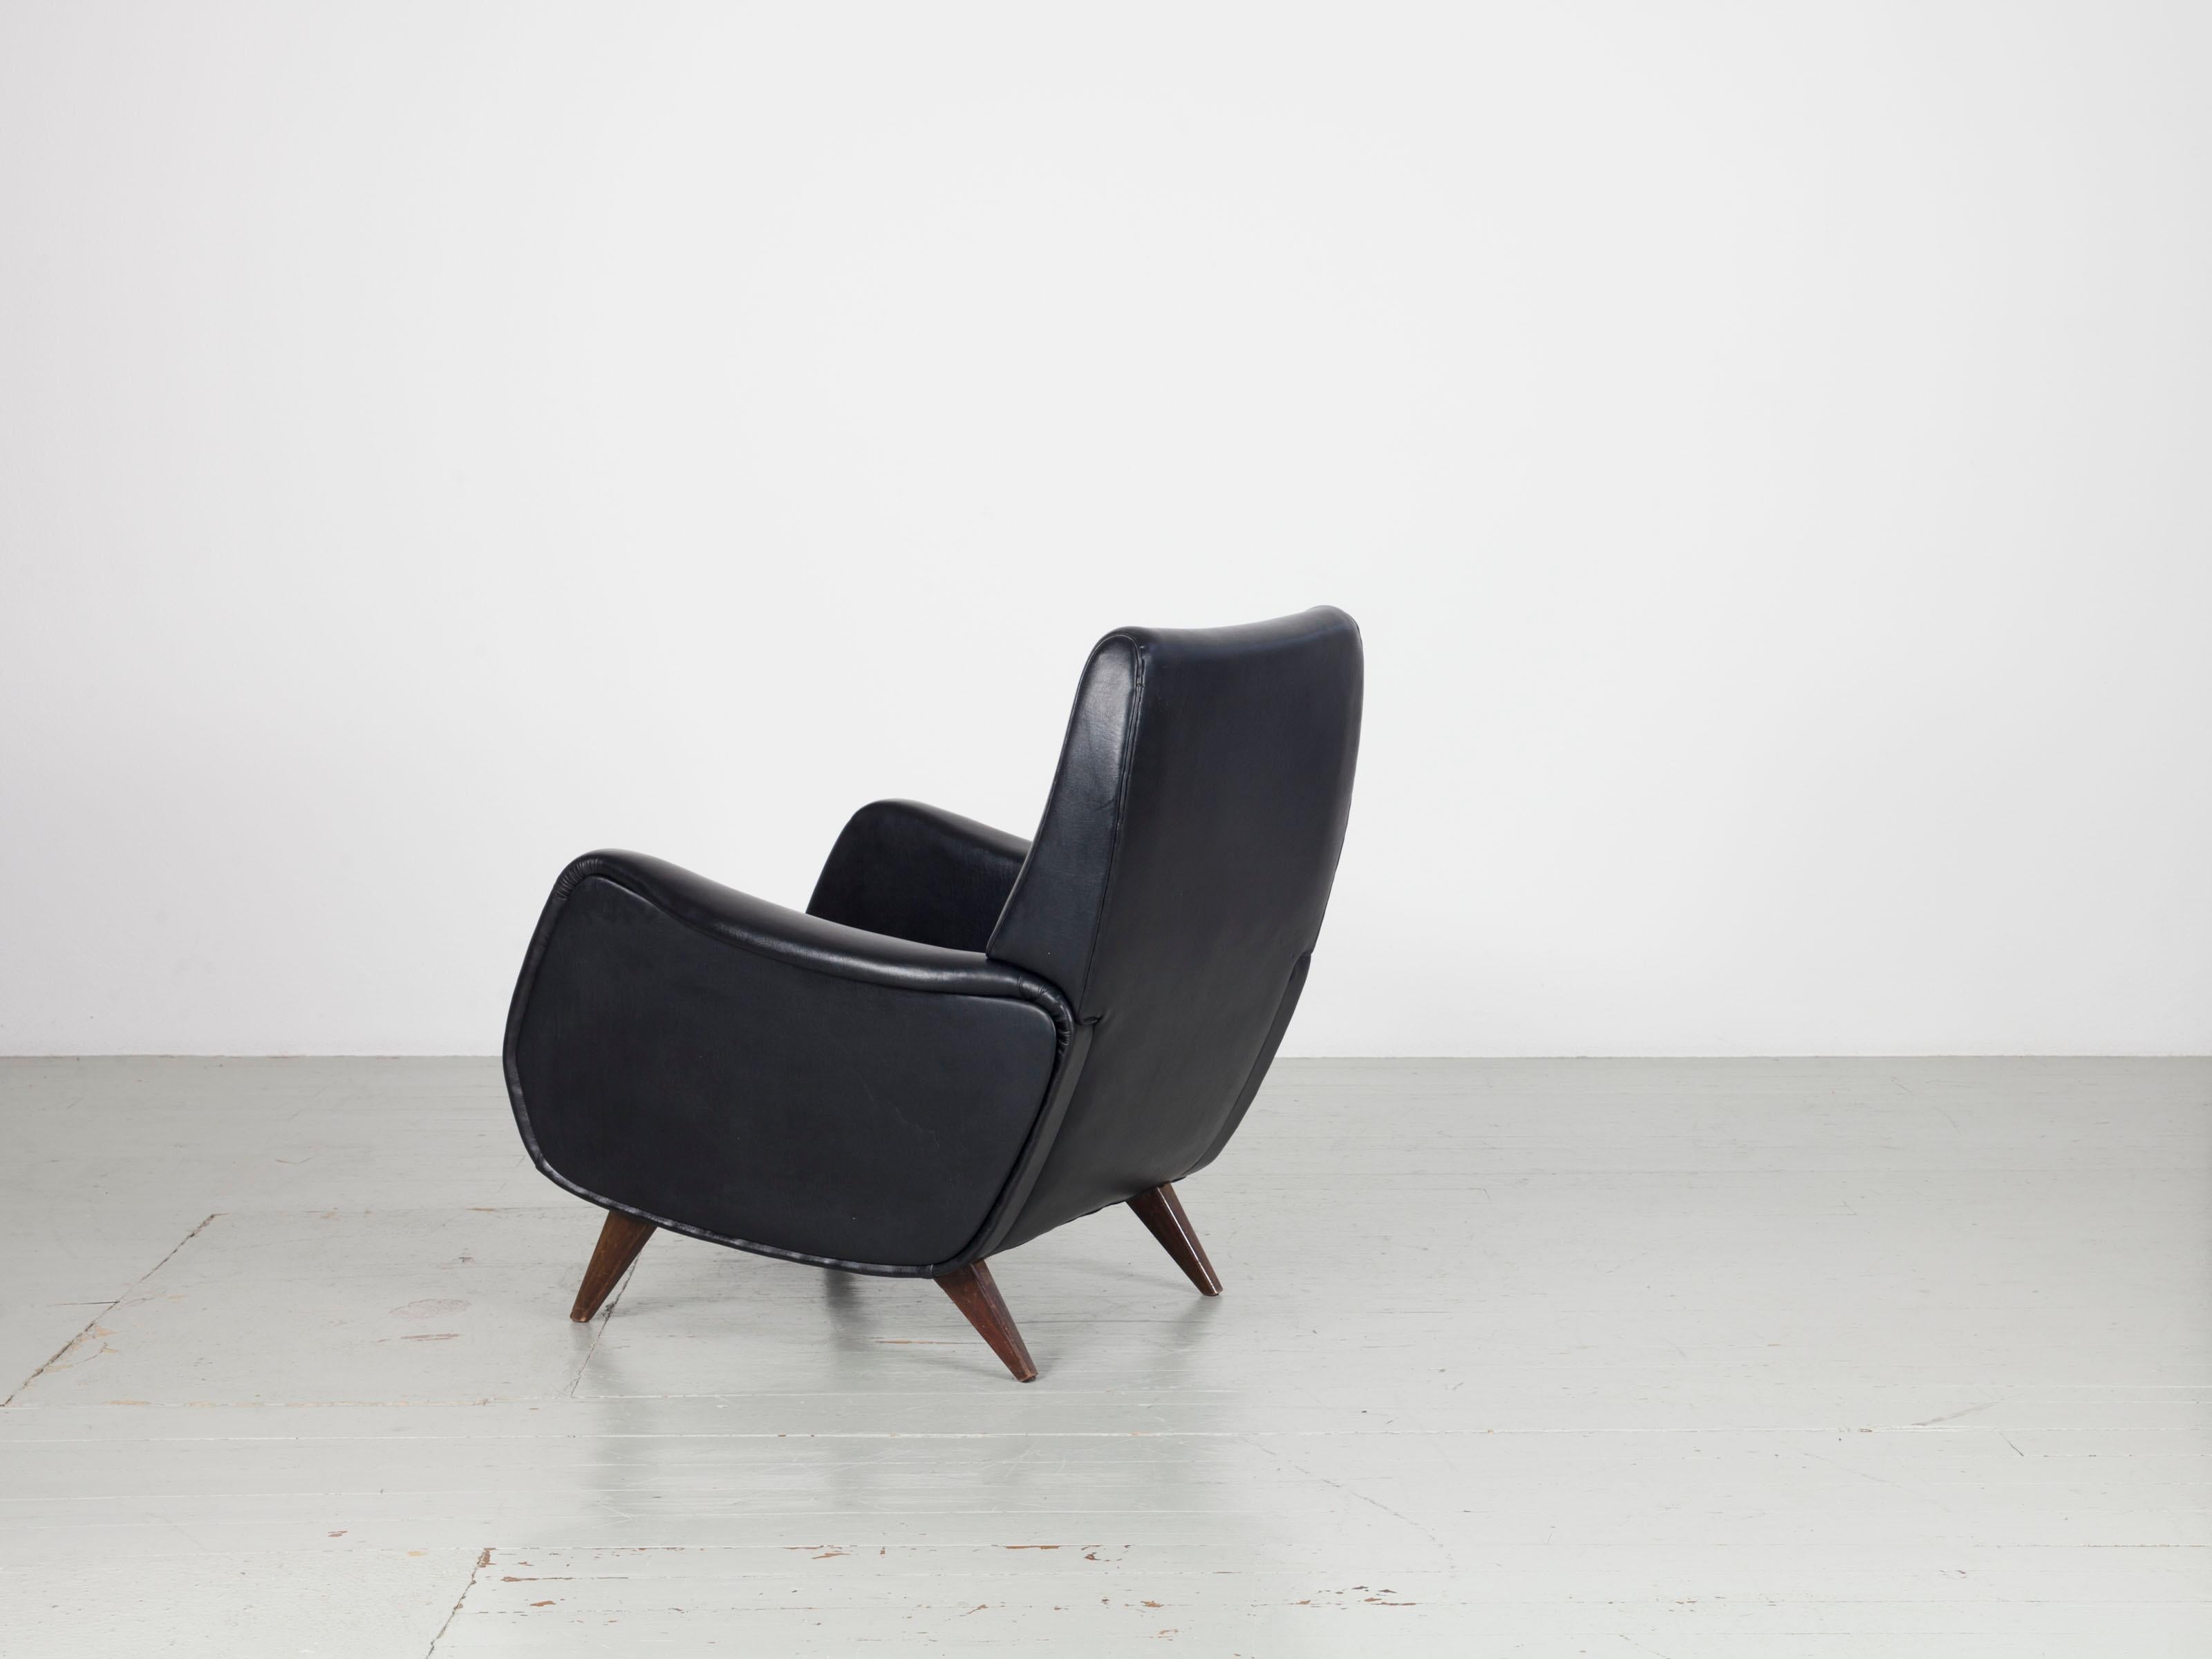 Set of Two Italian Armchairs in Original Black Leatherette Upholstery, 1950s For Sale 2